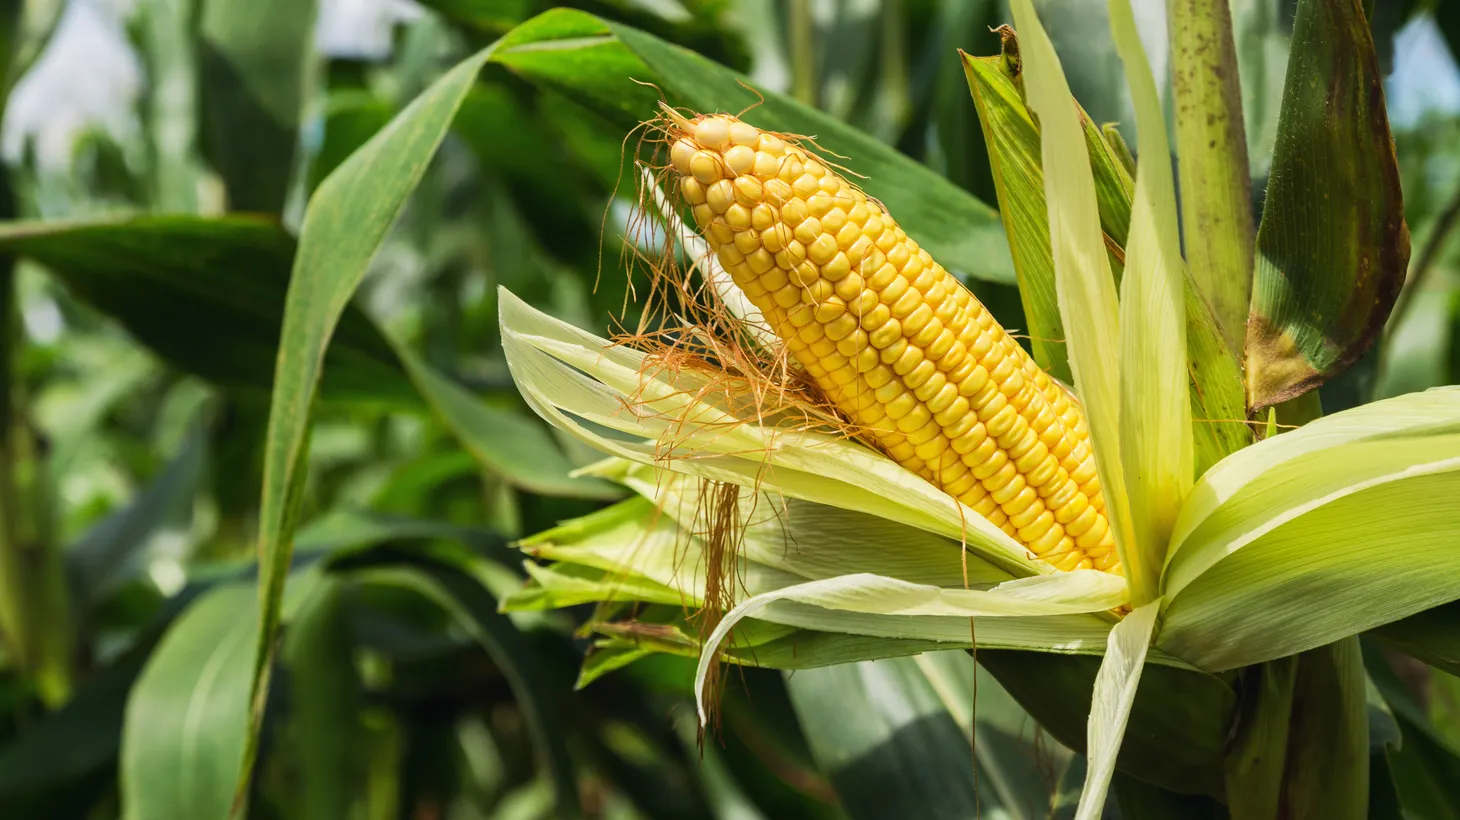 Of the 90 million acres of corn grown in the United States, roughly a third is turned into ethanol for fuel.